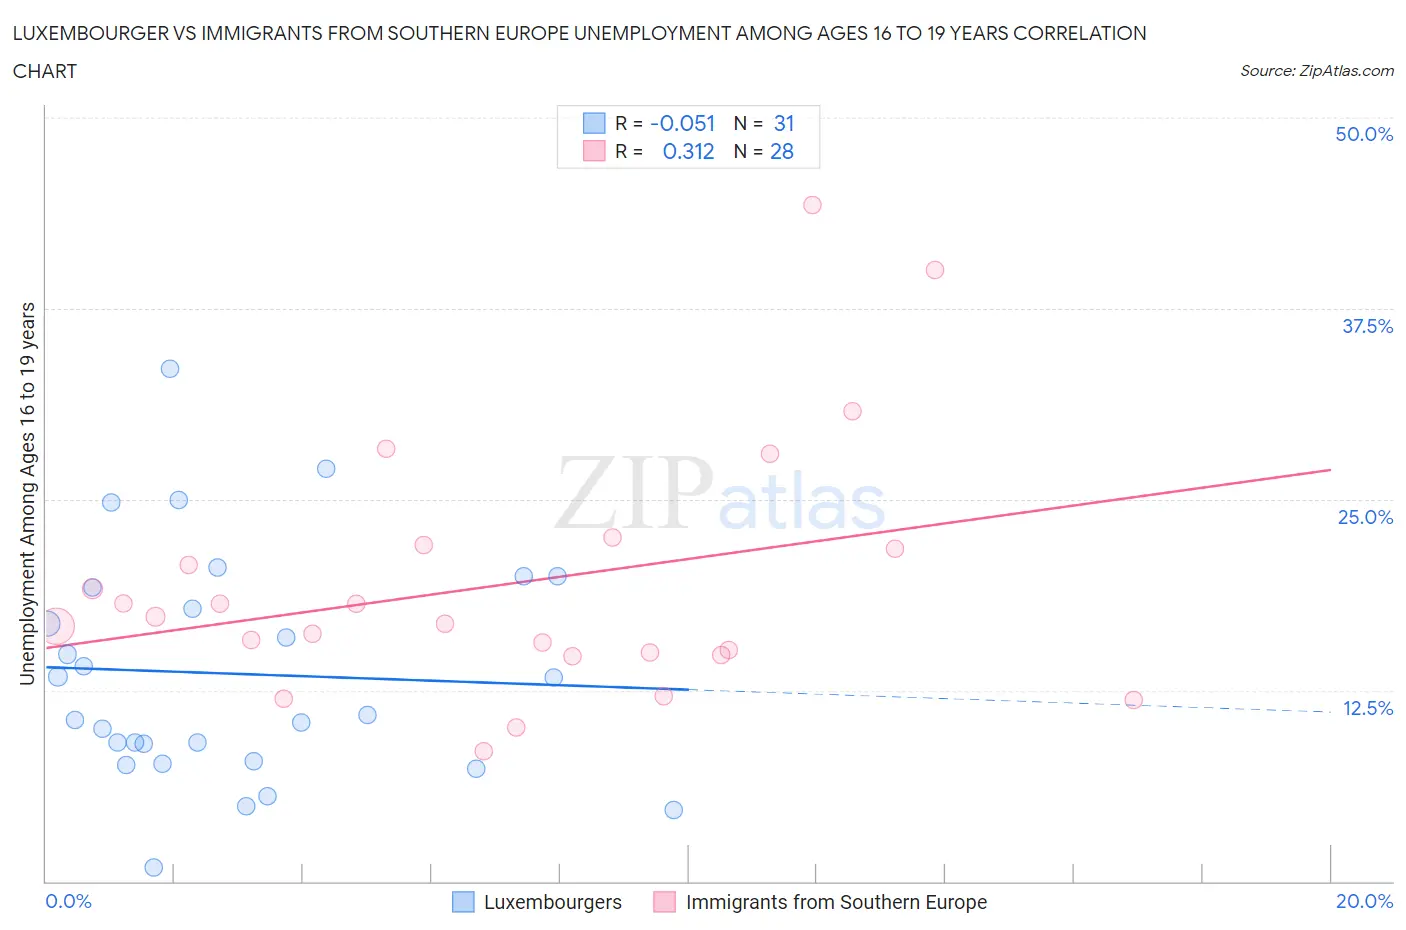 Luxembourger vs Immigrants from Southern Europe Unemployment Among Ages 16 to 19 years